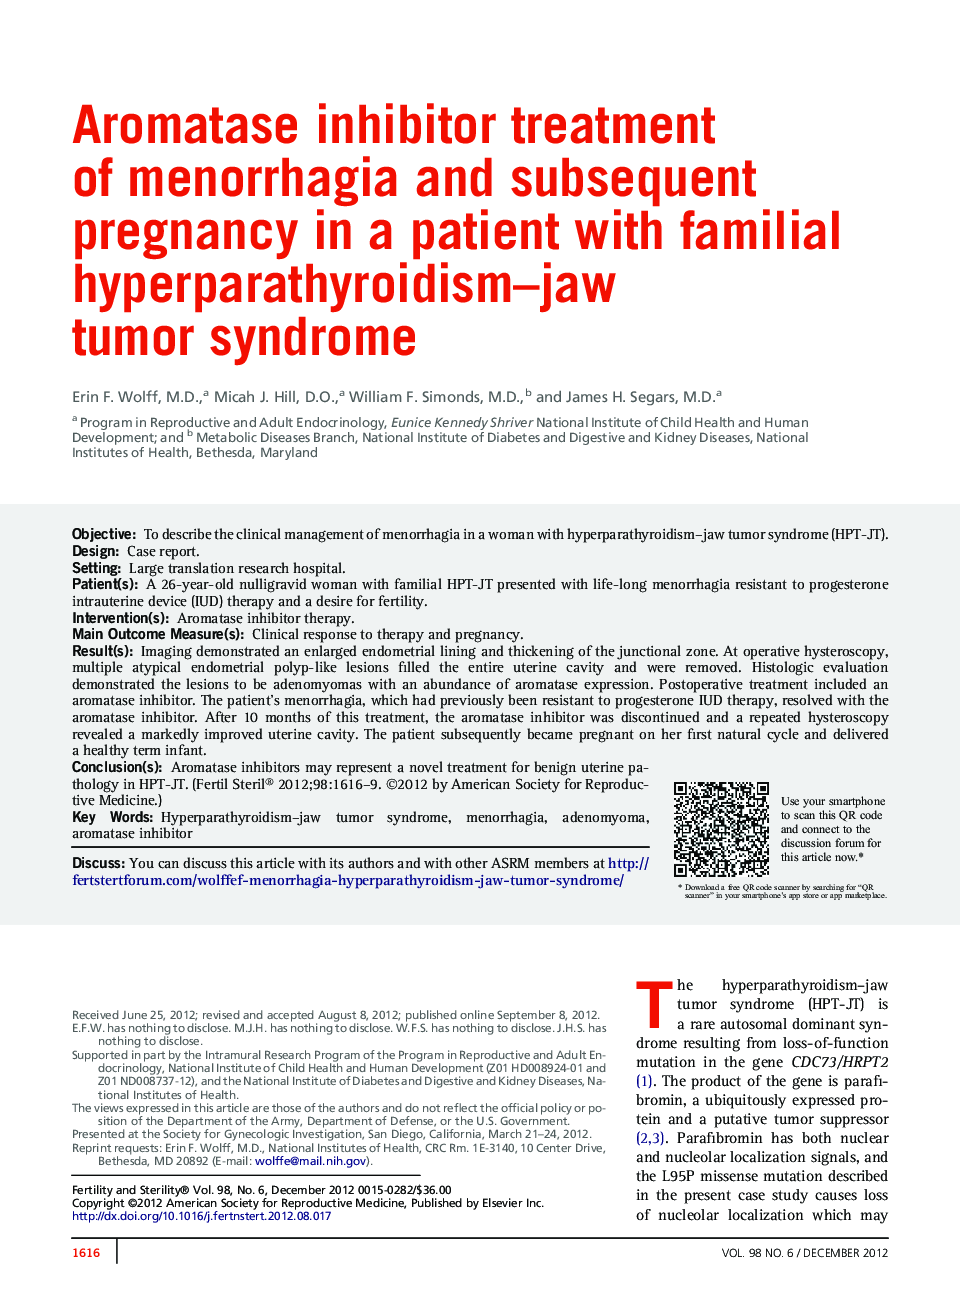 Aromatase inhibitor treatment ofÂ menorrhagia and subsequent pregnancy in a patient with familial hyperparathyroidism-jaw tumor syndrome